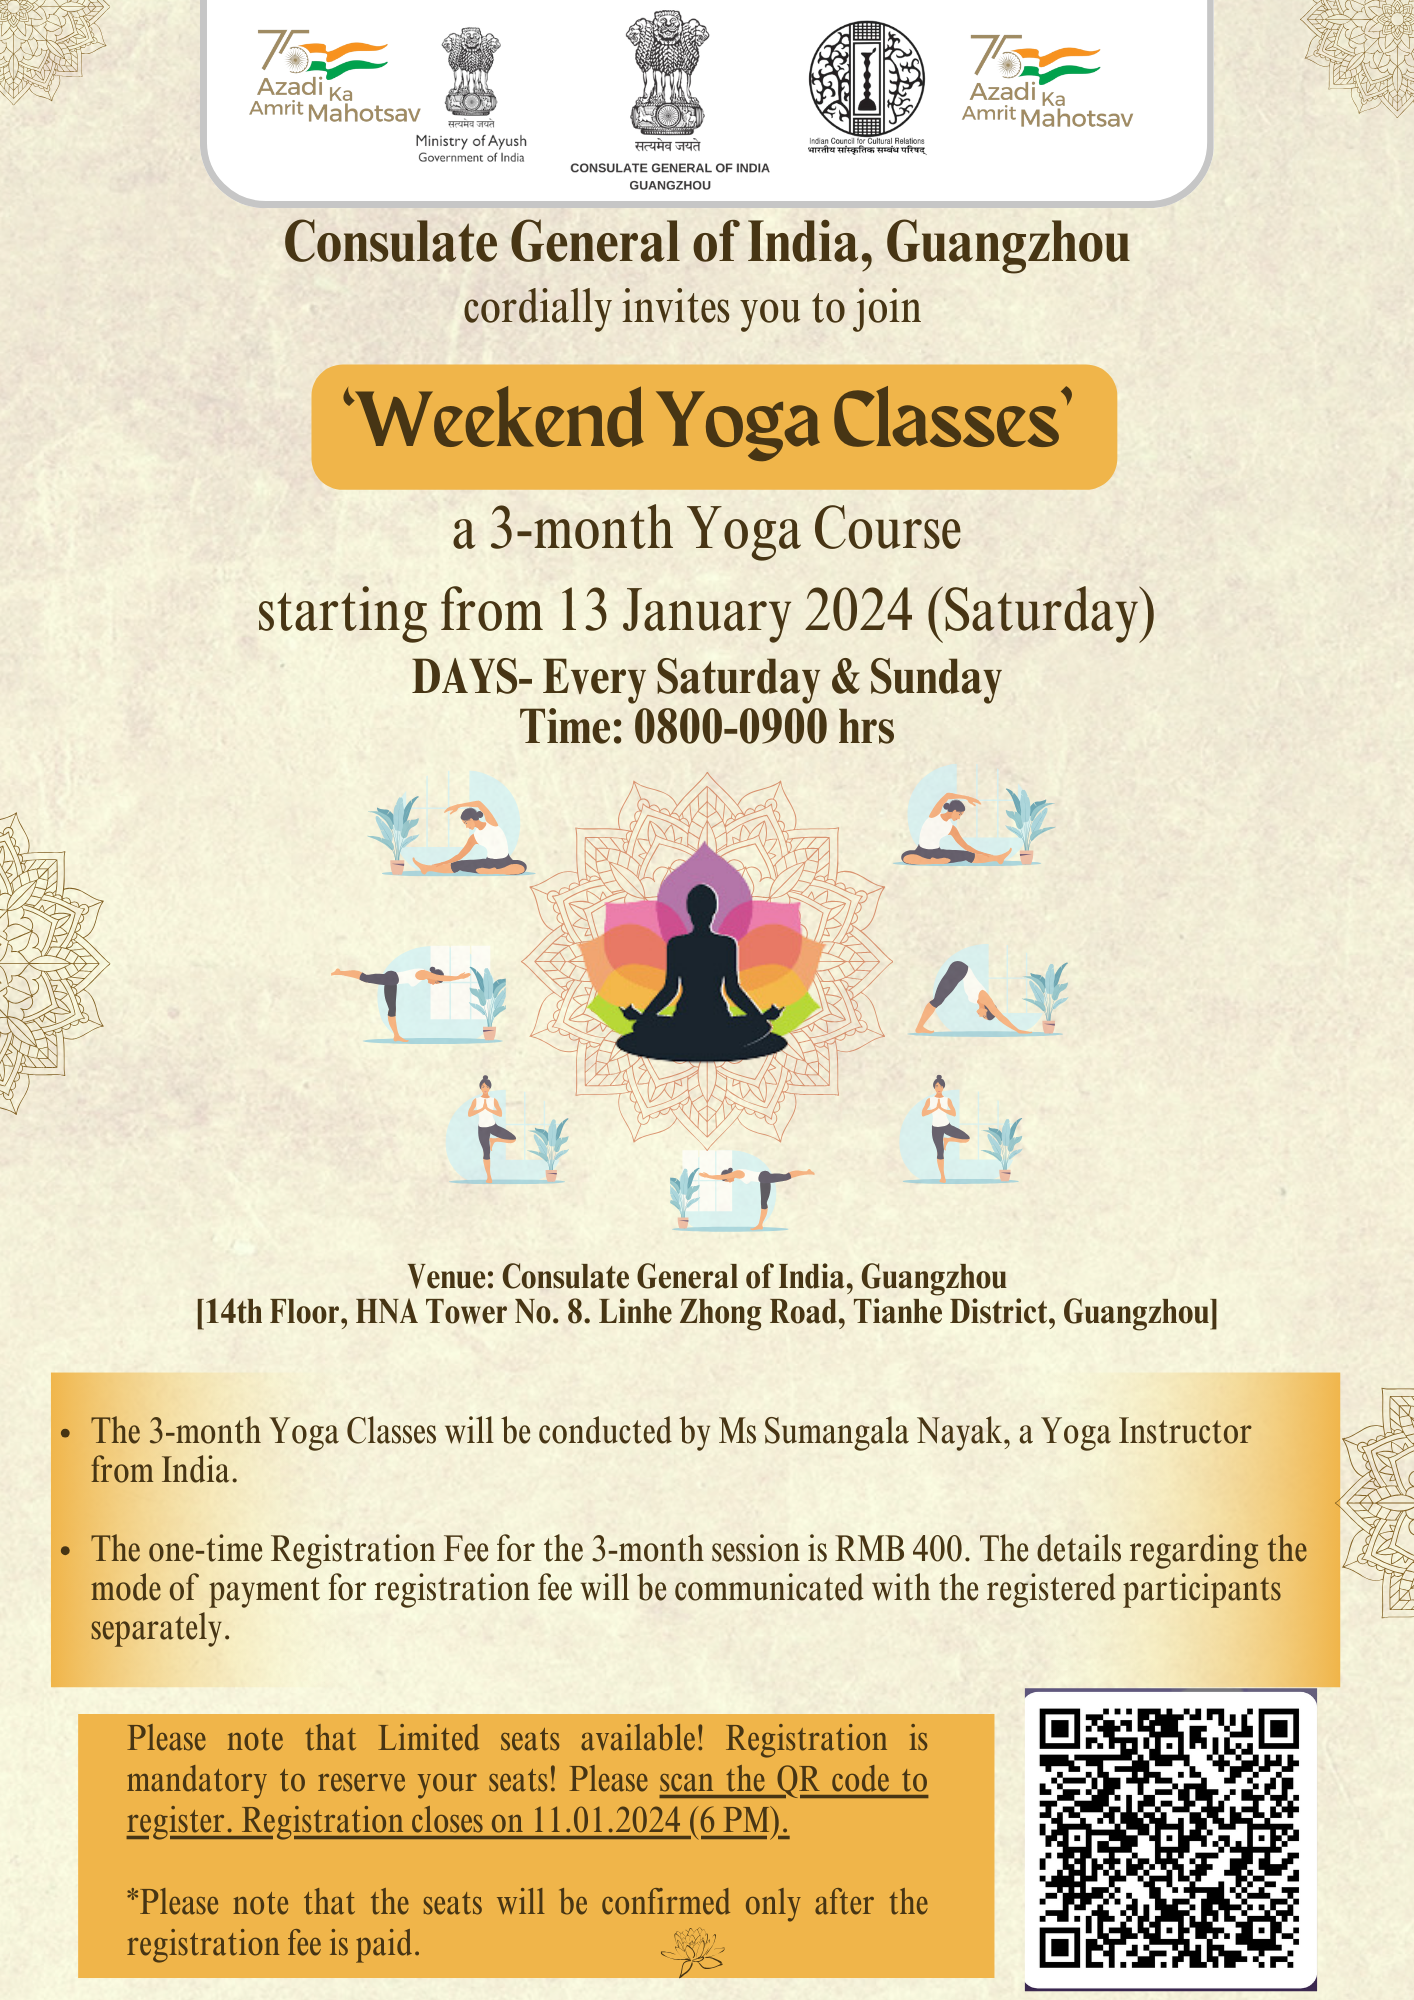 Invitation for ‘Weekend Yoga Classes’ starting from 13 January 2024 (Saturday)